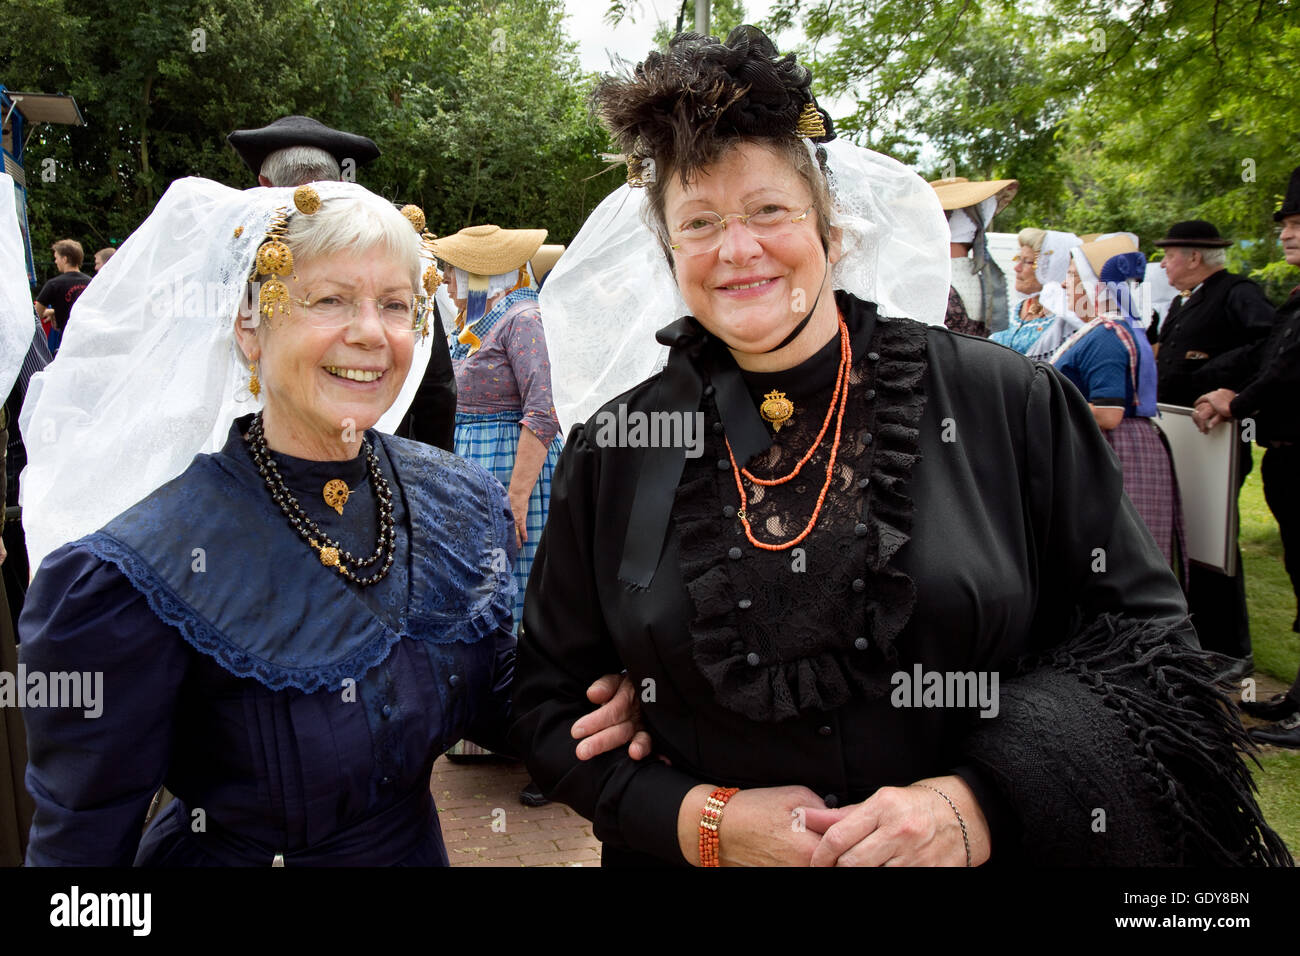 Dutch people from the province of Zeeland wearing typical nostalgic